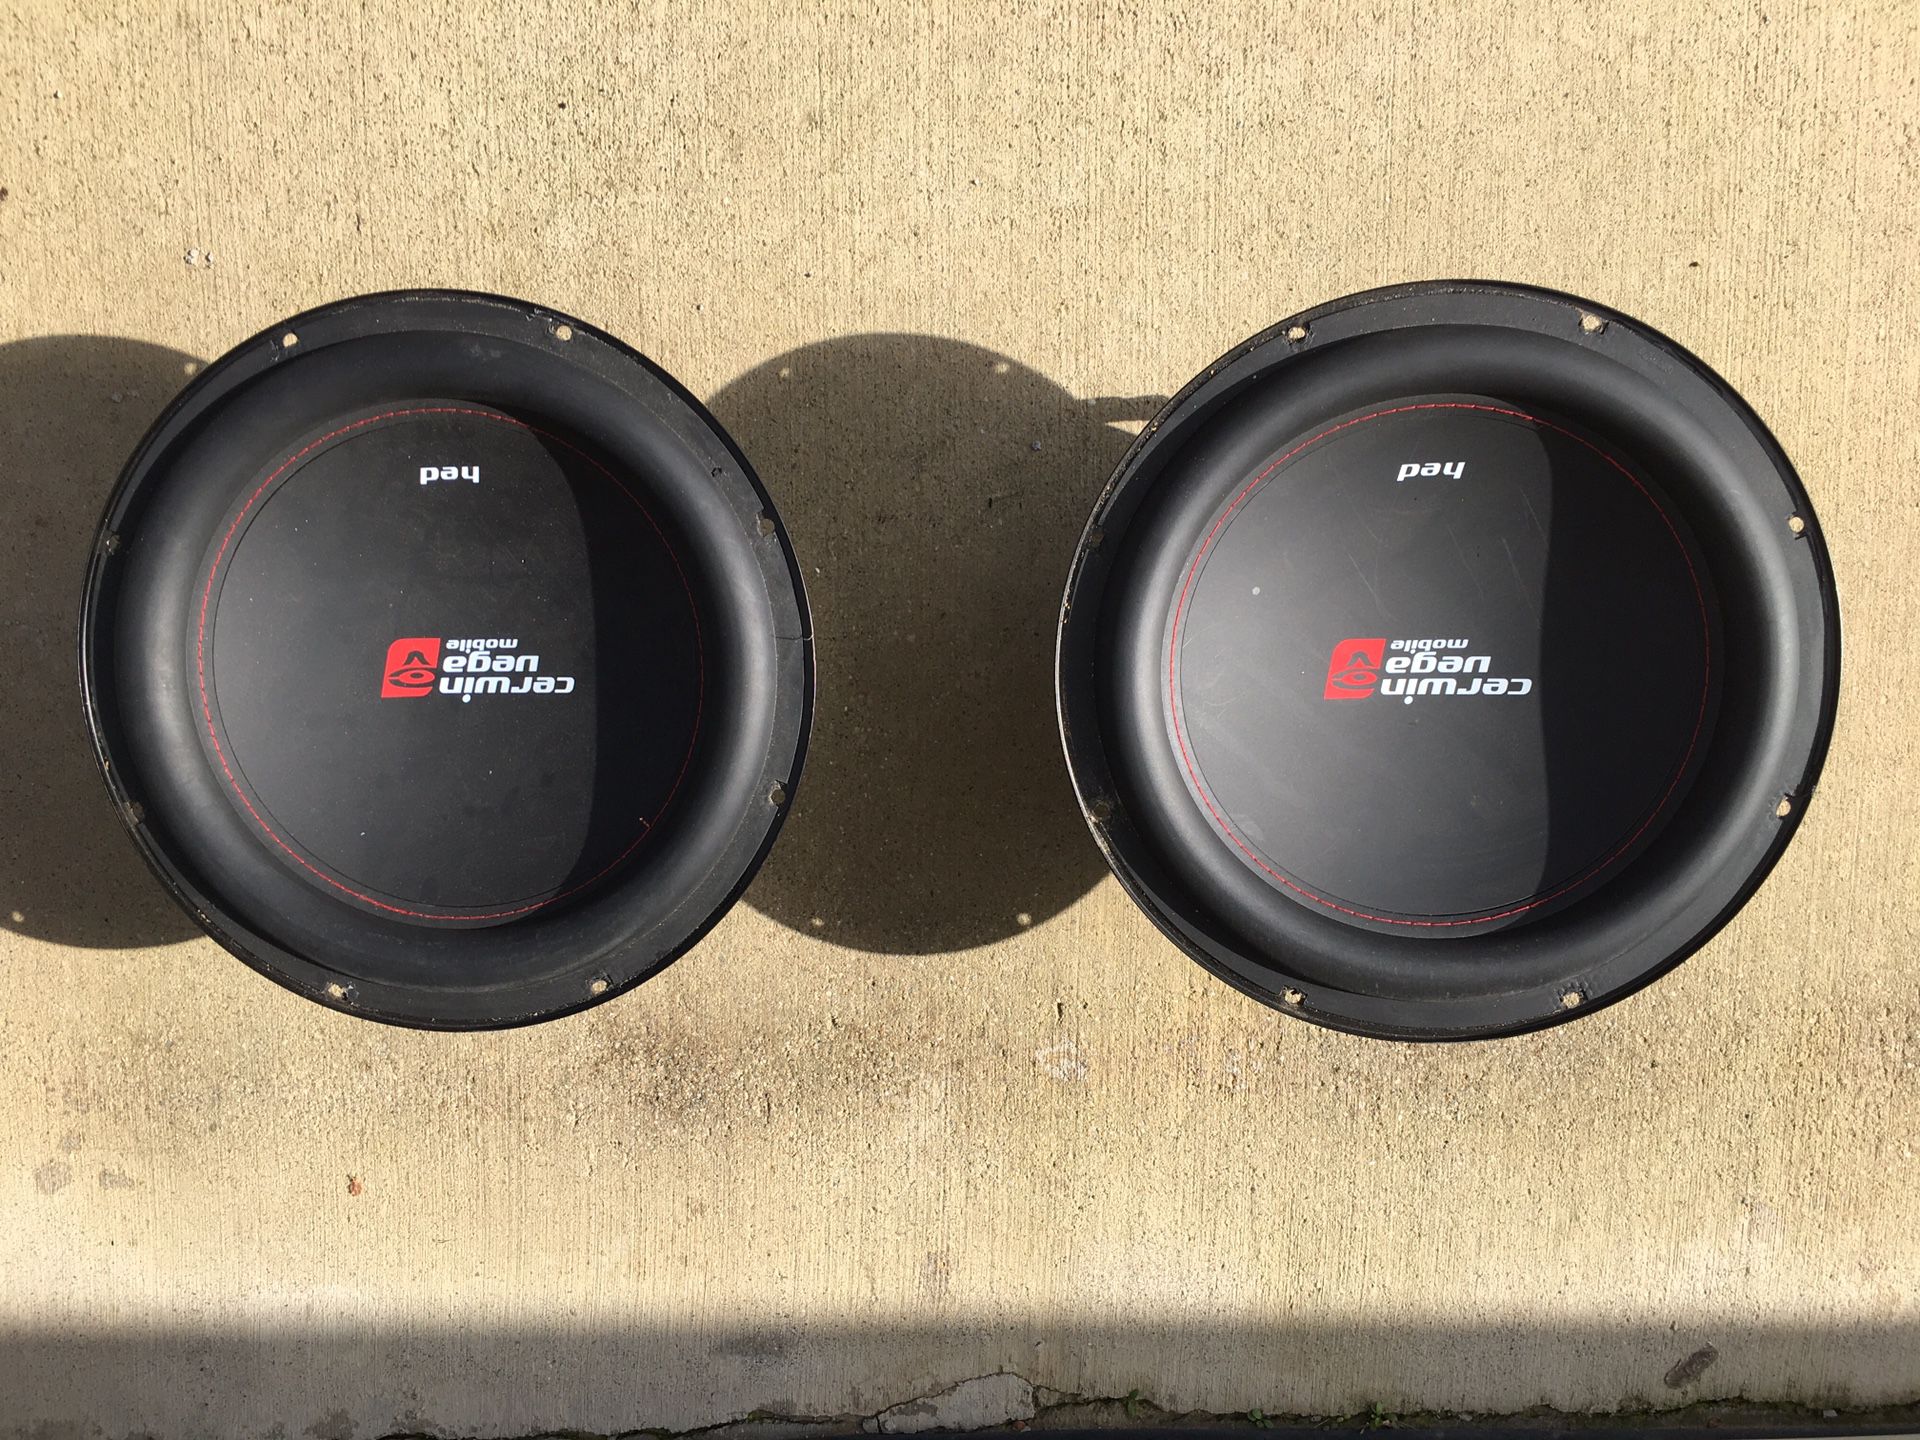 Brand new not even broken in yet 12 inch subs I paid 150 for Them asking hundred or best offer